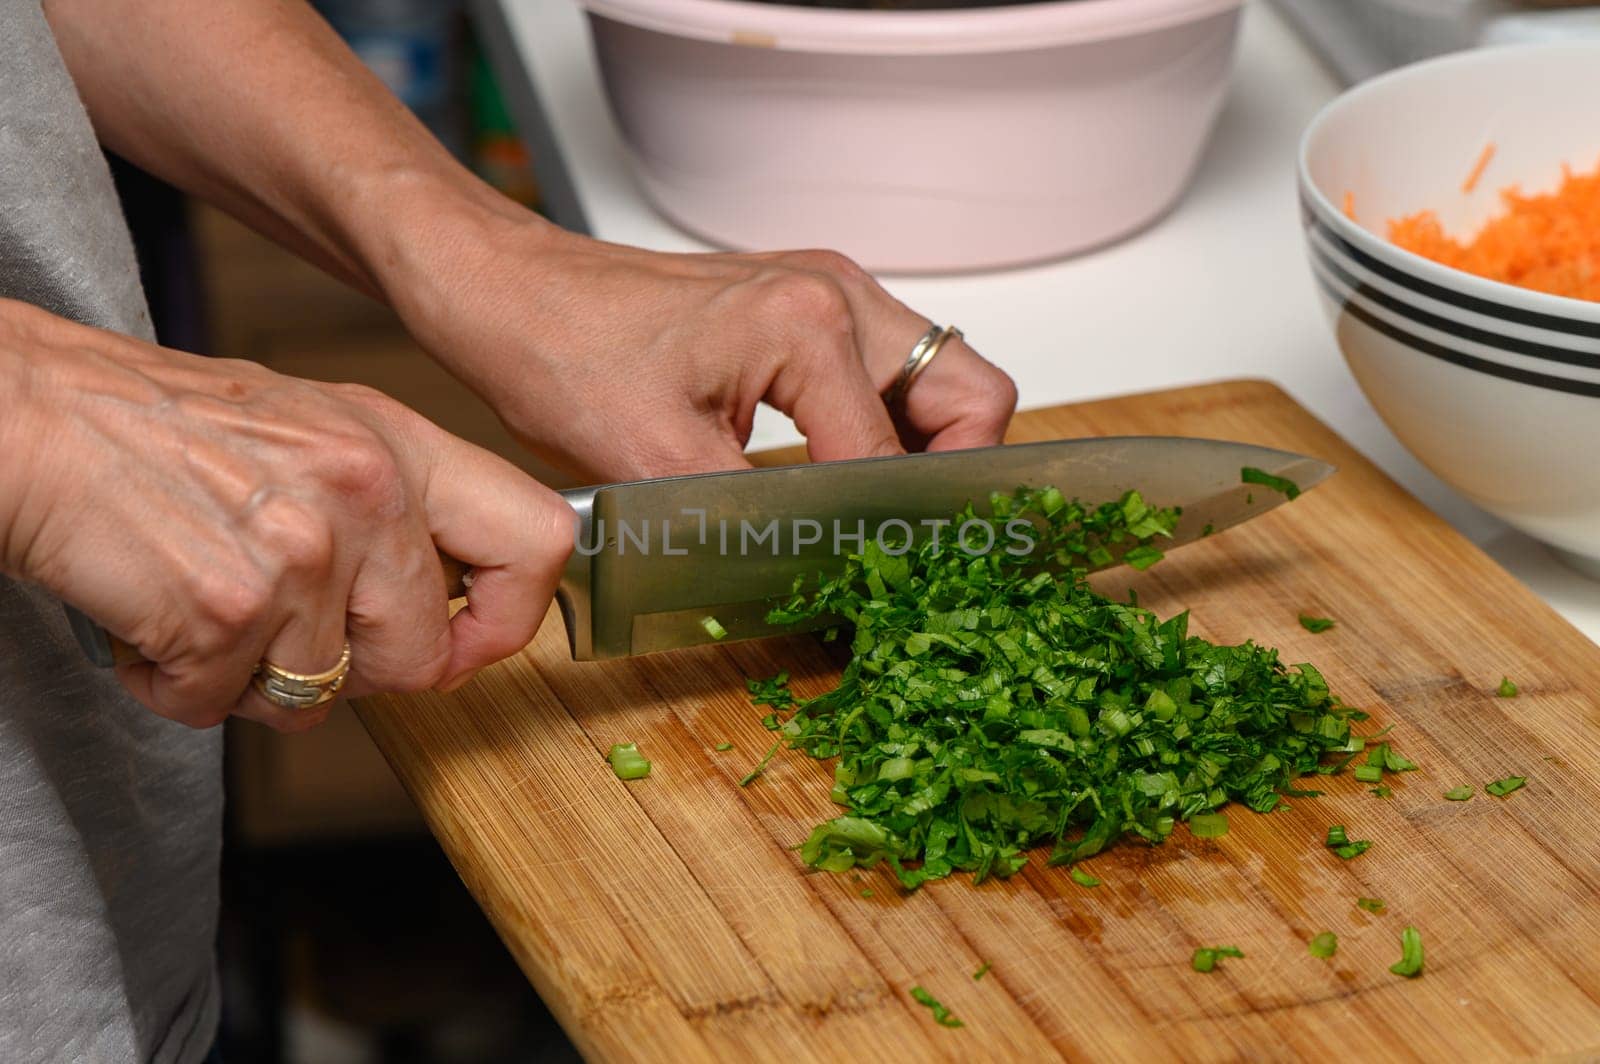 woman cutting parsley on a cutting board in the kitchen 2 by Mixa74